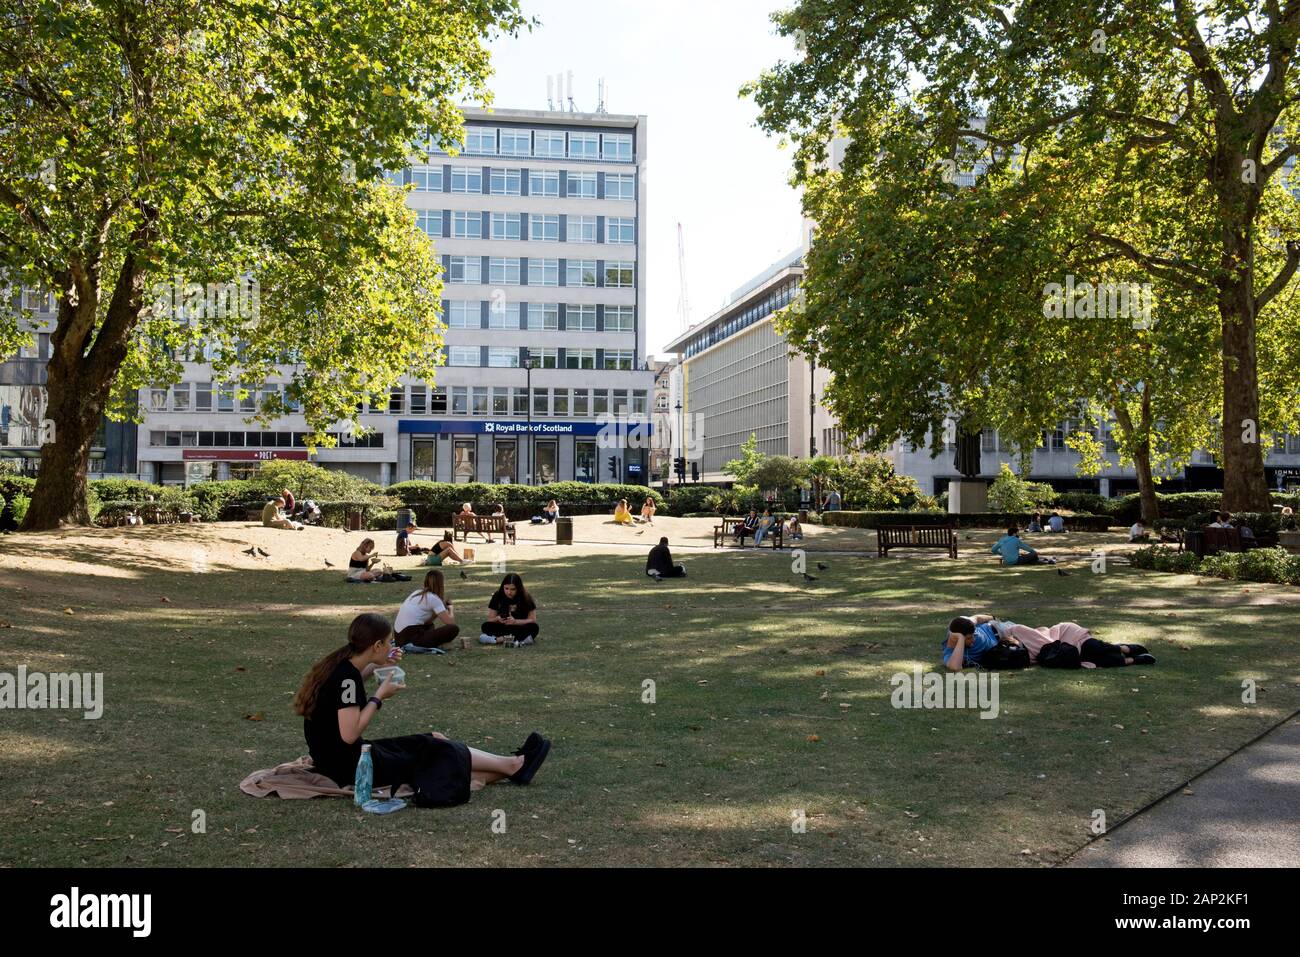 People sitting on grass and eating in Cavendish Square, Marylebone, City of Westminster, London England Britain UK Stock Photo